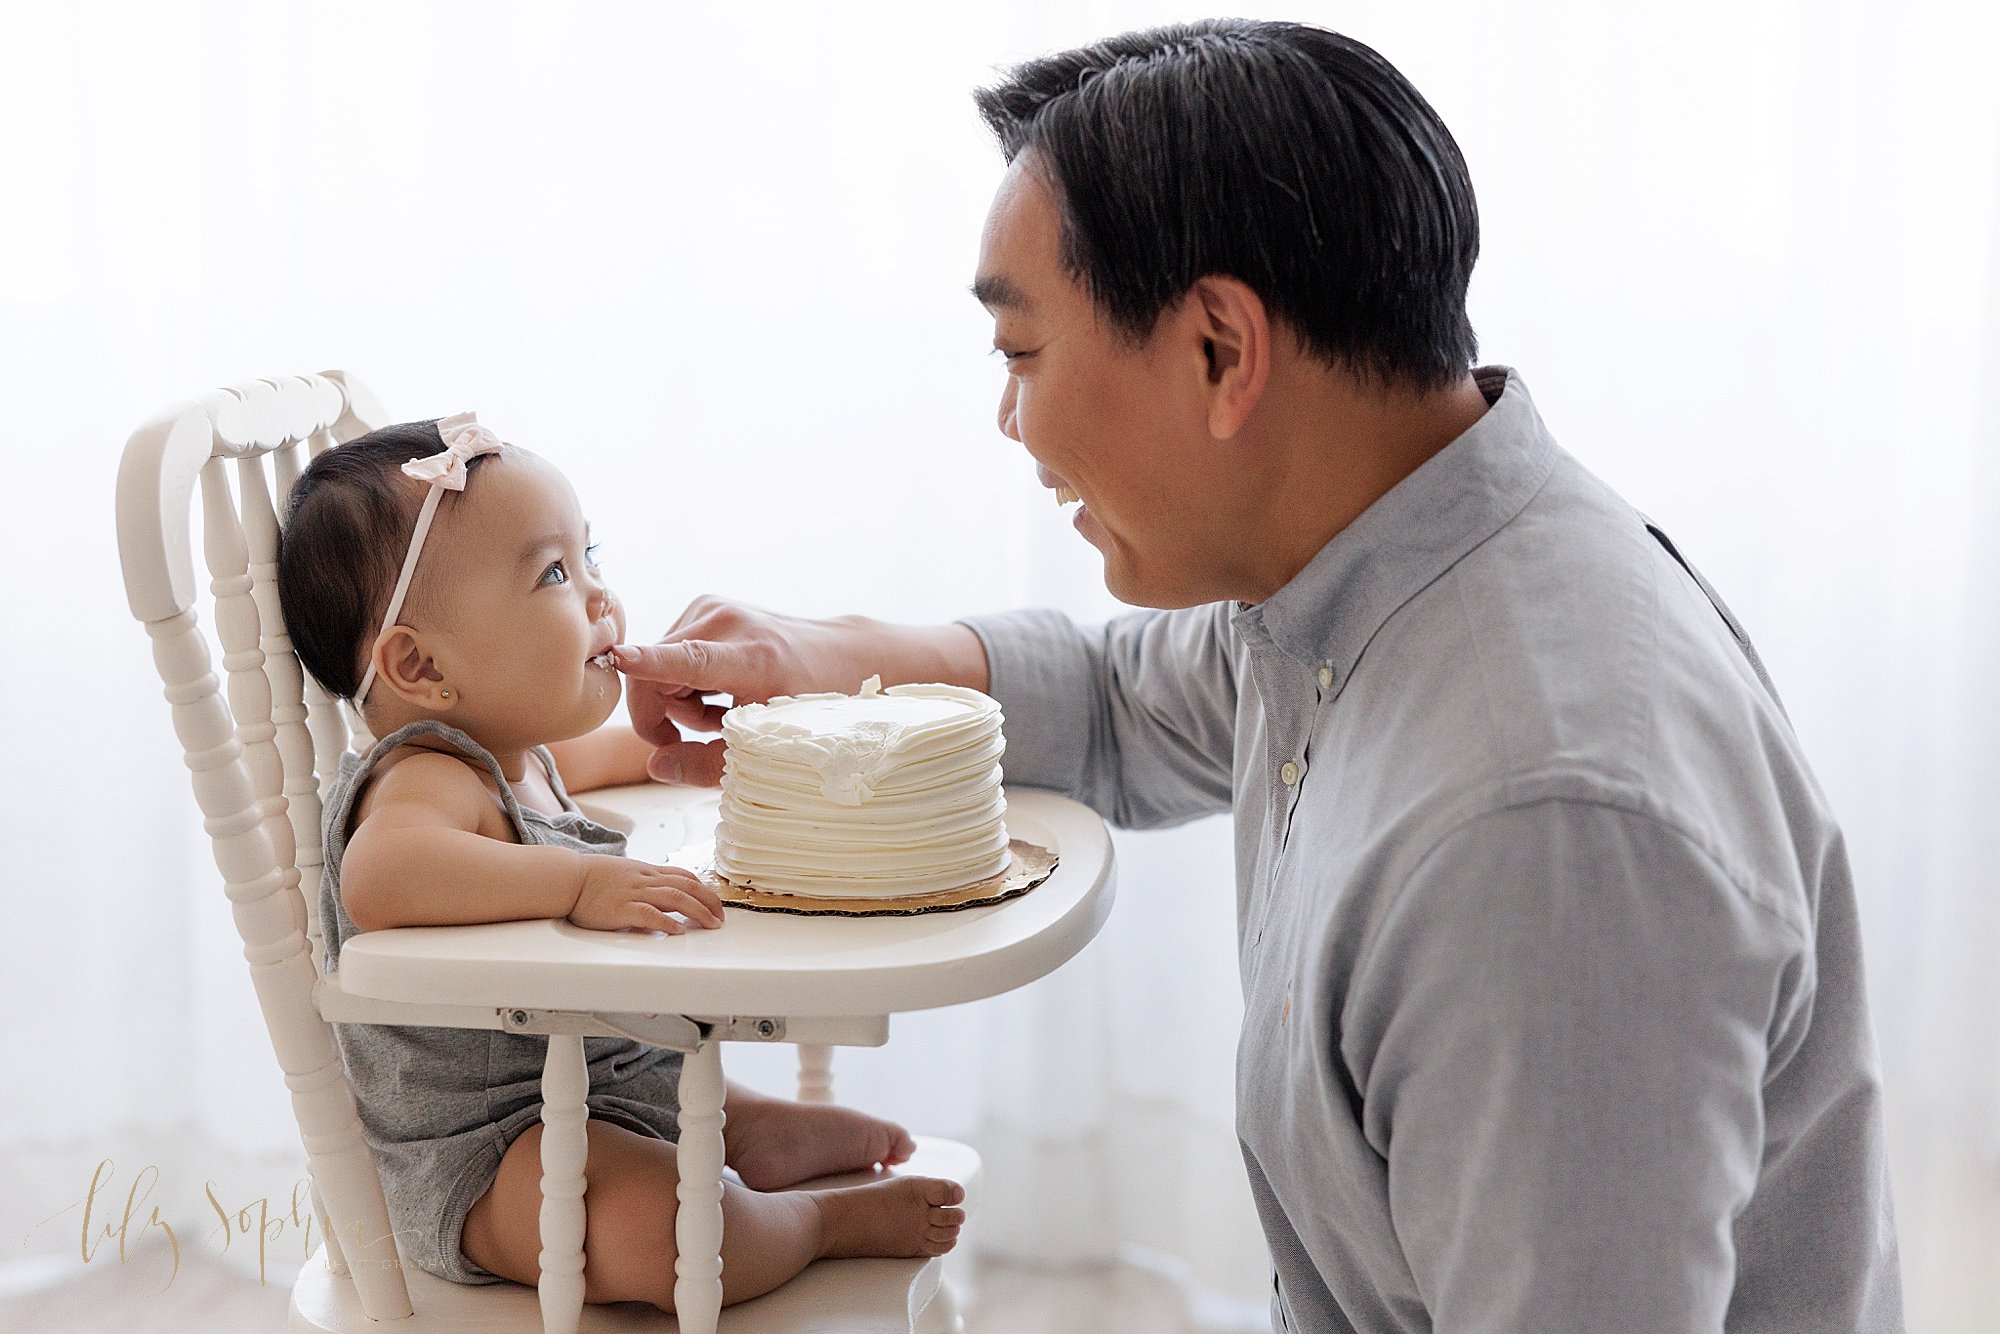  Smash cake first birthday photo of a one year old Asian girl sitting in an antique high chair with her father sitting in kneeling in front of her to give her some icing from the smash cake on the tray as the two look at each other taken in front of 